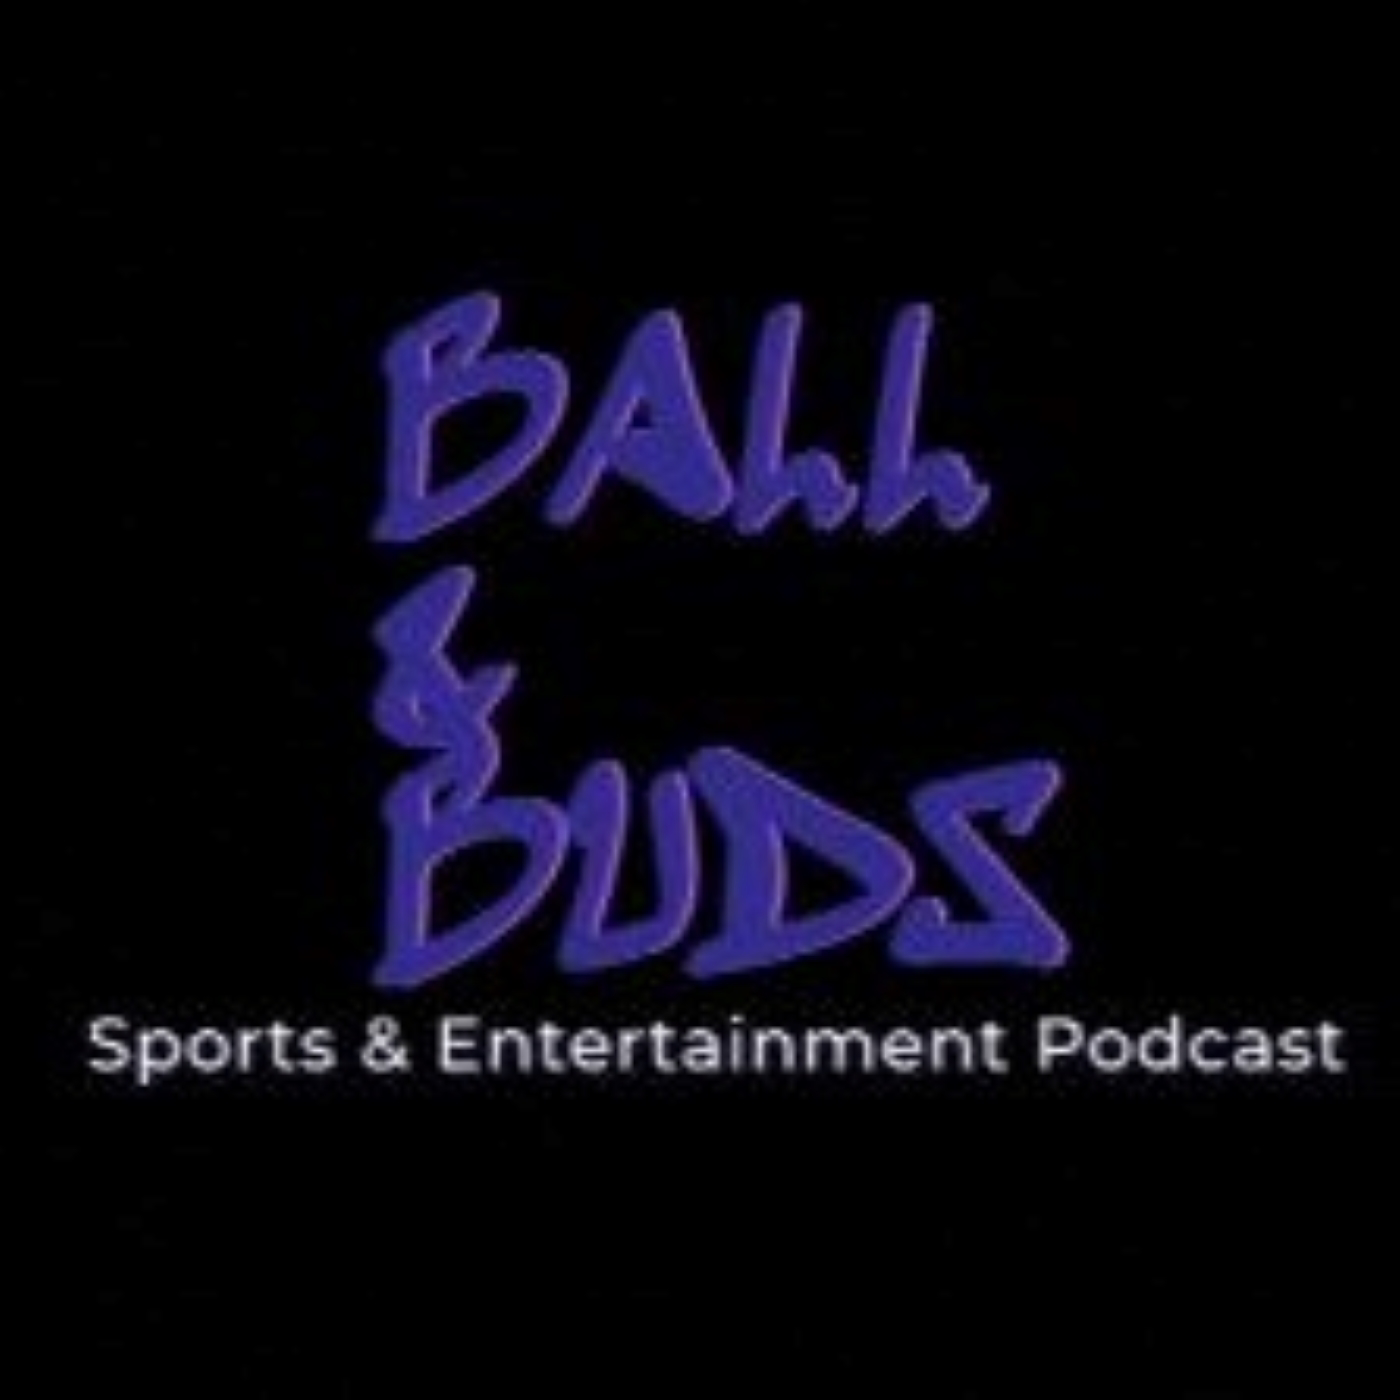 A highlight from 'Sports & Entertainment News Compilation (#1)' ft. 703 Boyz (Ball & Buds Podcast Episode #20)